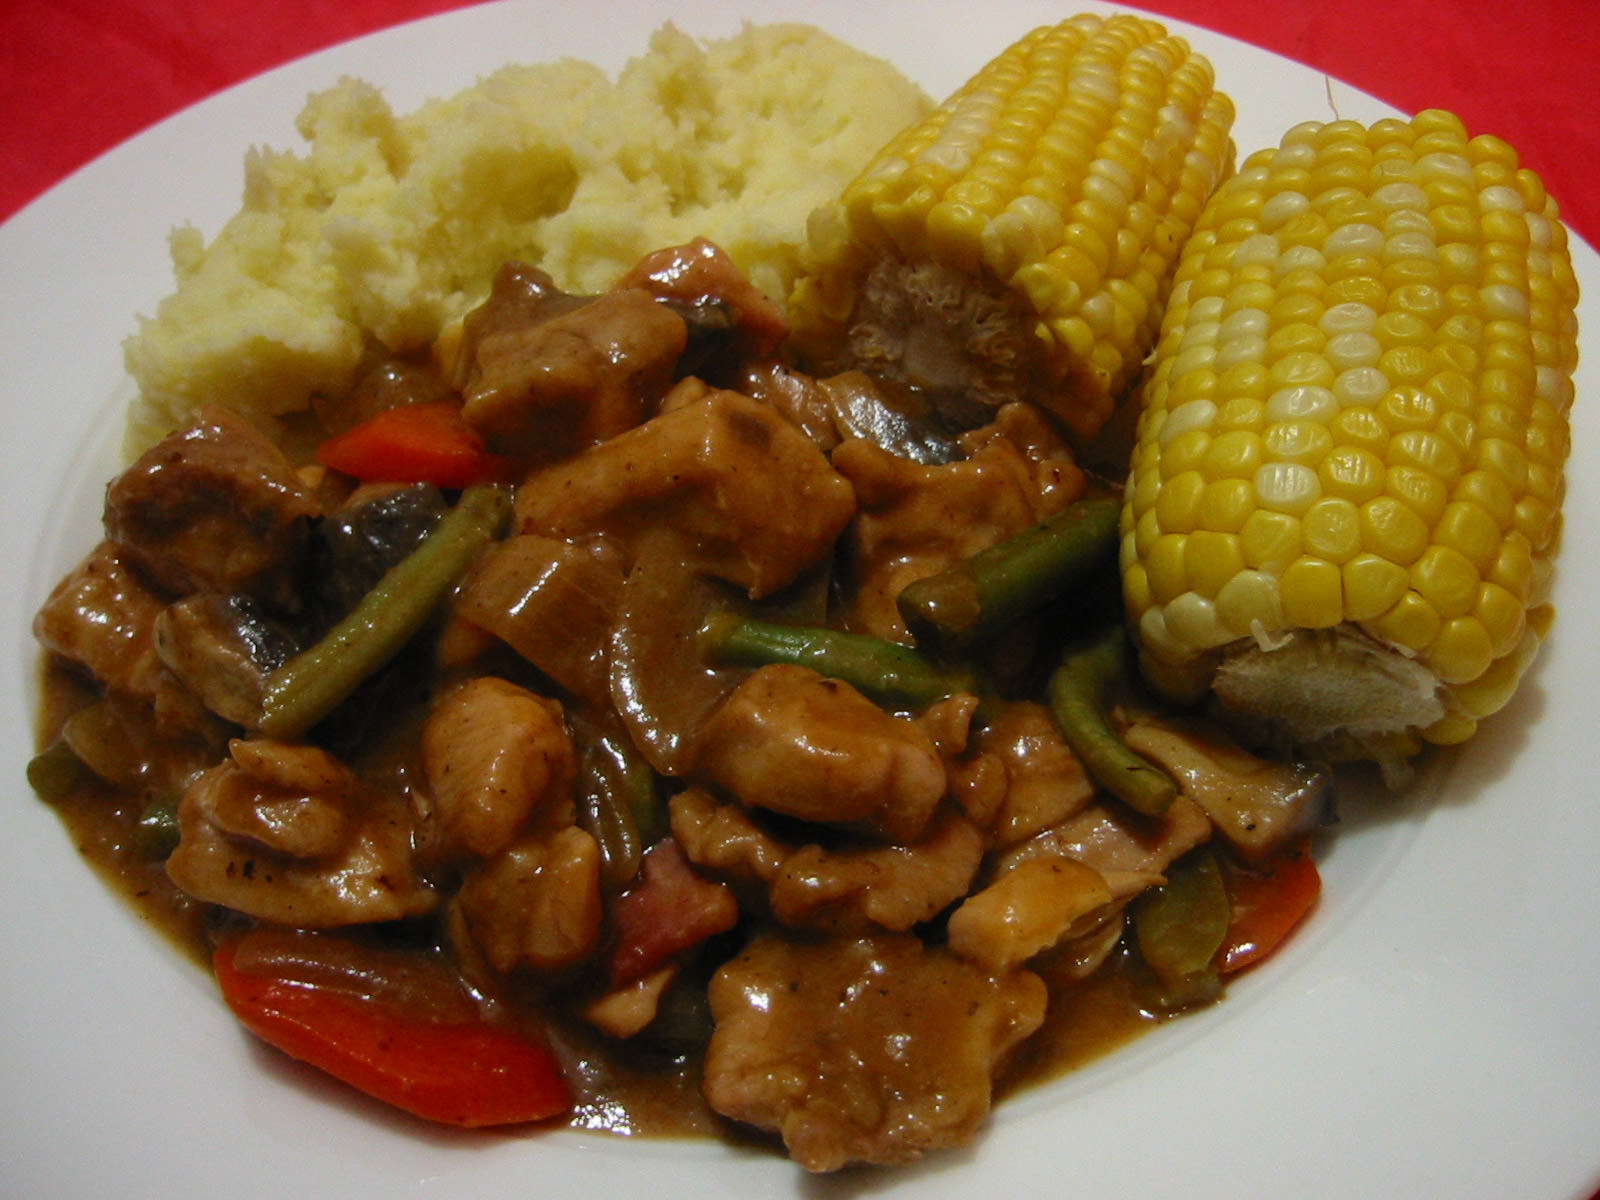 Chicken and mushroom casserole, mashed potatoes and corn